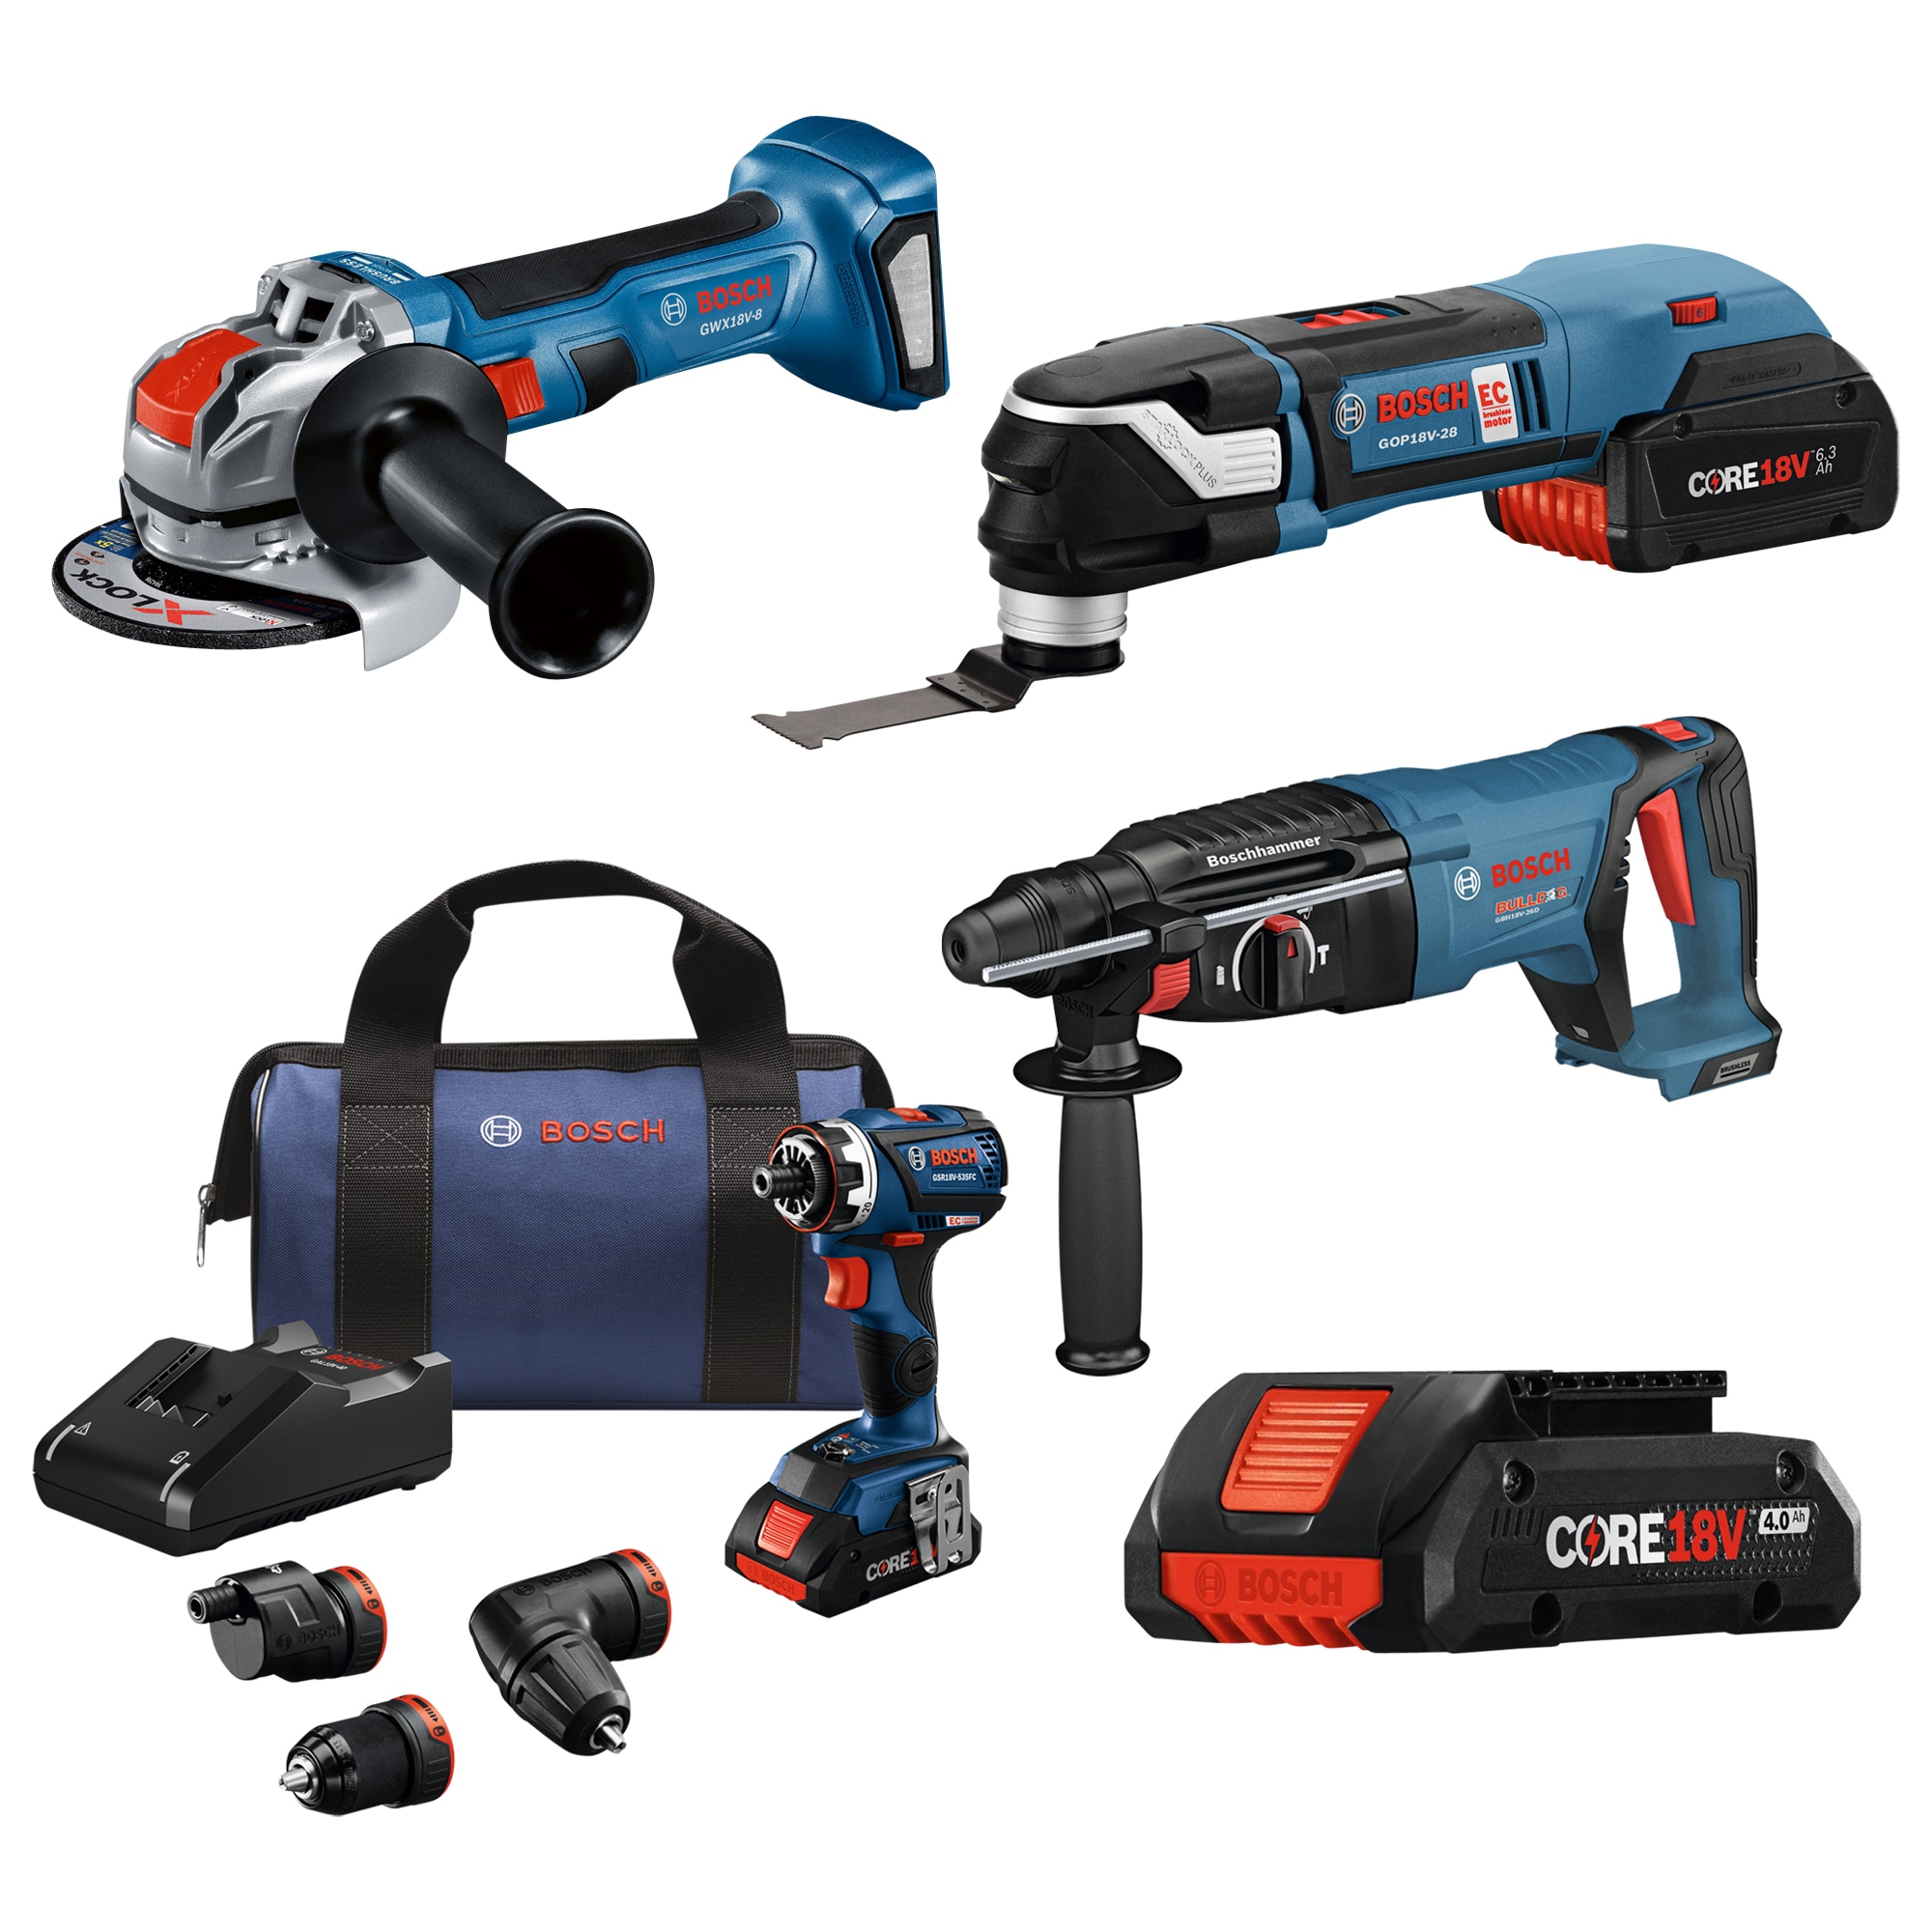 Bosch 18V Brushless 5-Tool Kit w/ Chameleon 5-in-1 Drill Driver/ Starlock Oscillating Tool/ X-Lock Grinder/ Rotary Hammer/ 2x4.0ah Batteries with